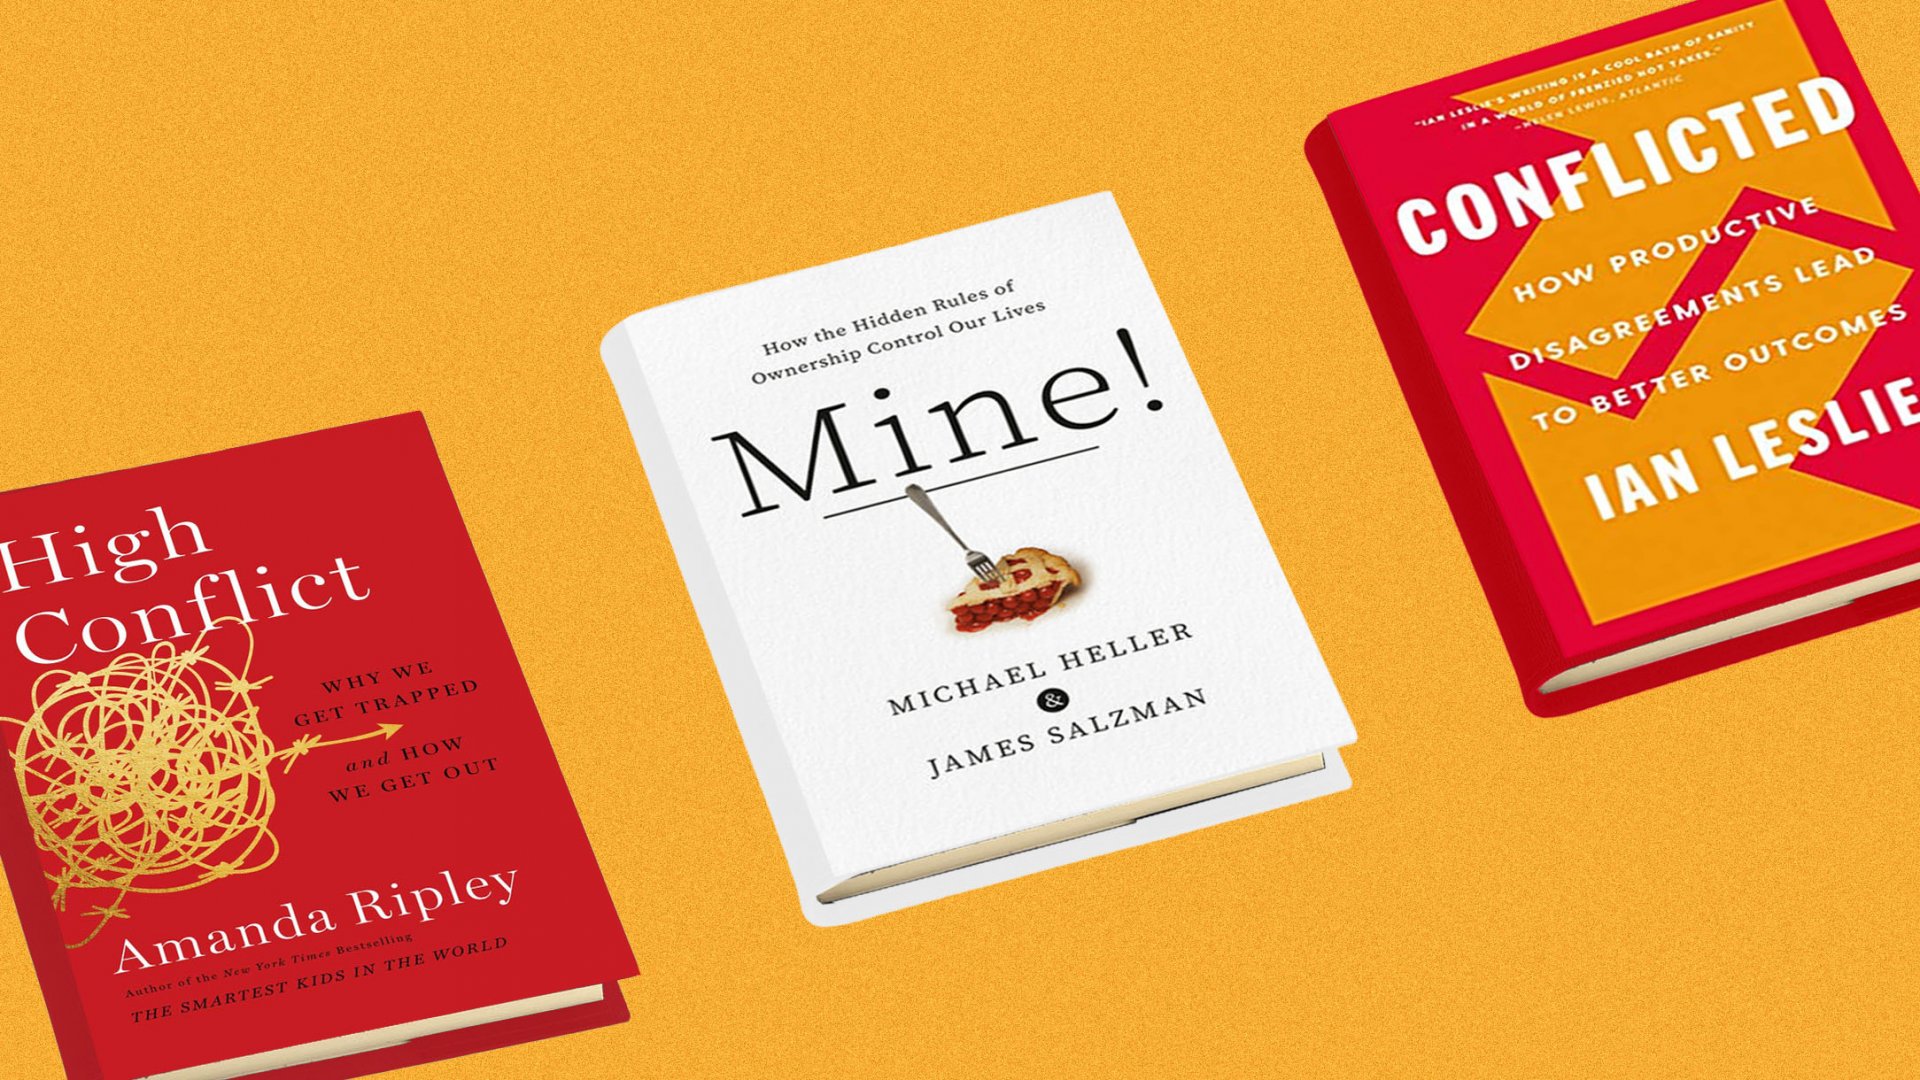 12 New Books That Will Make You Smarter, According to Adam Grant, The bestselling author and star Wharton professor is out with his regular list of the season's best new titles.